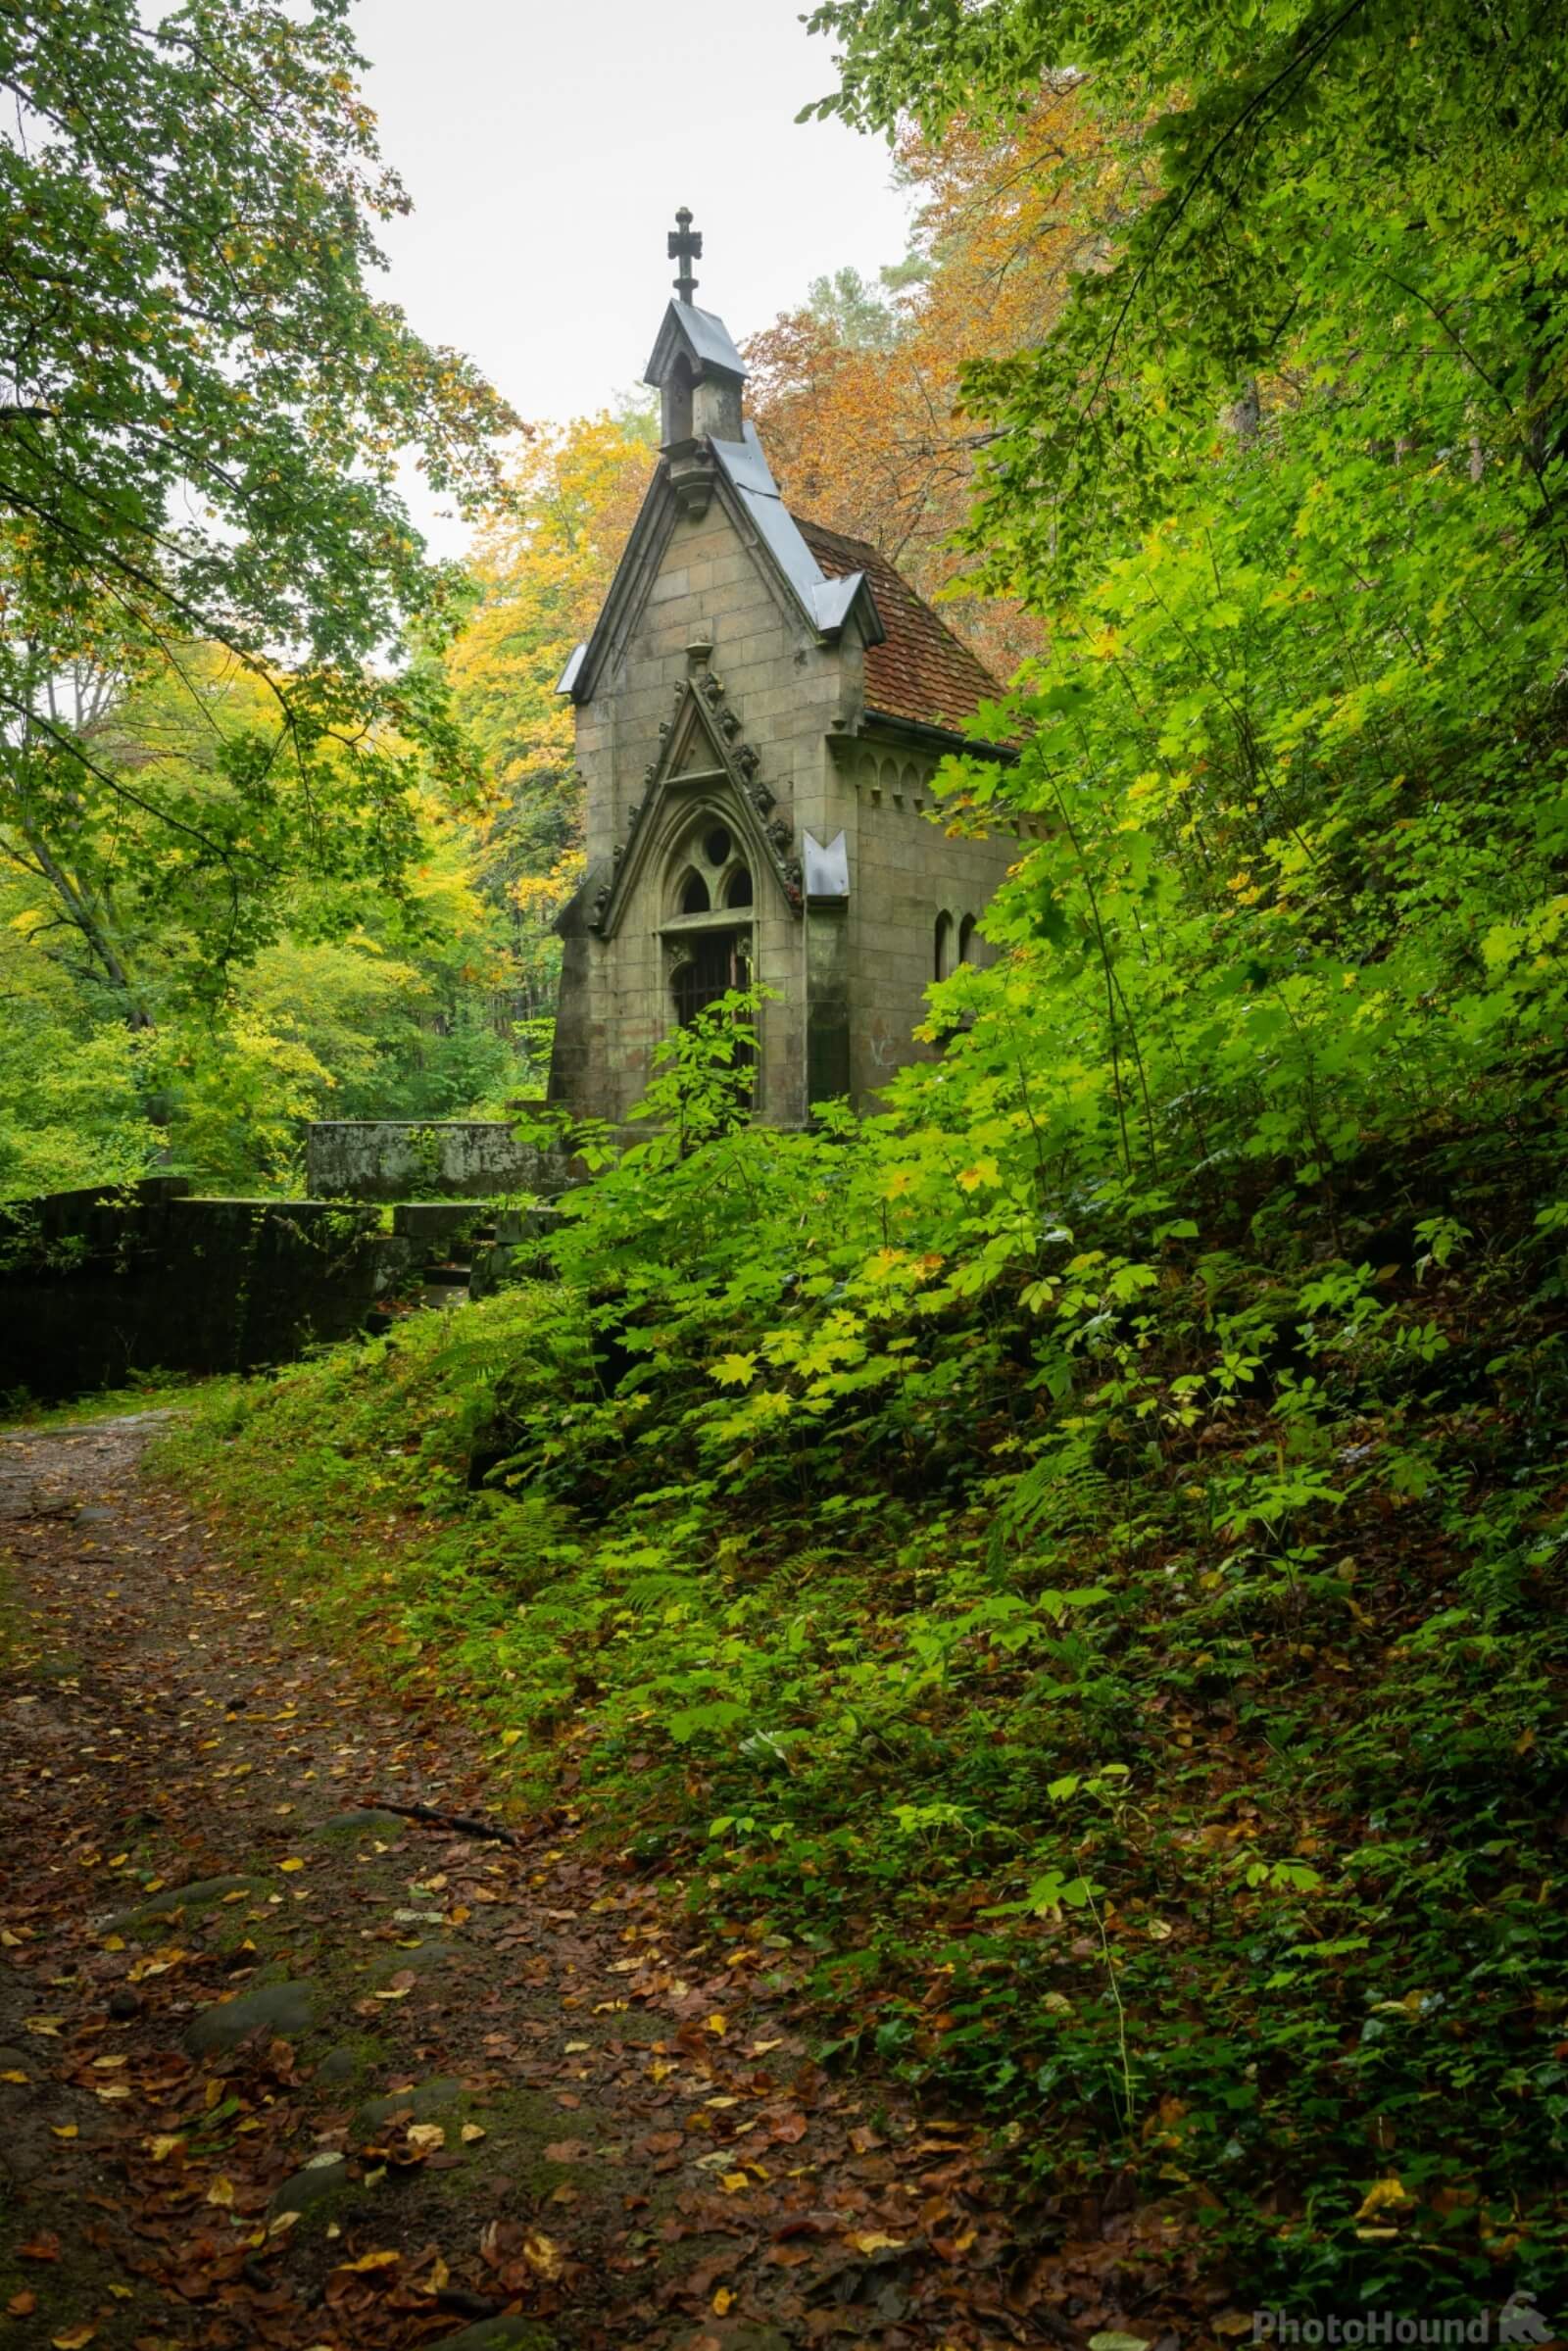 Image of Clary Chapel by VOJTa Herout